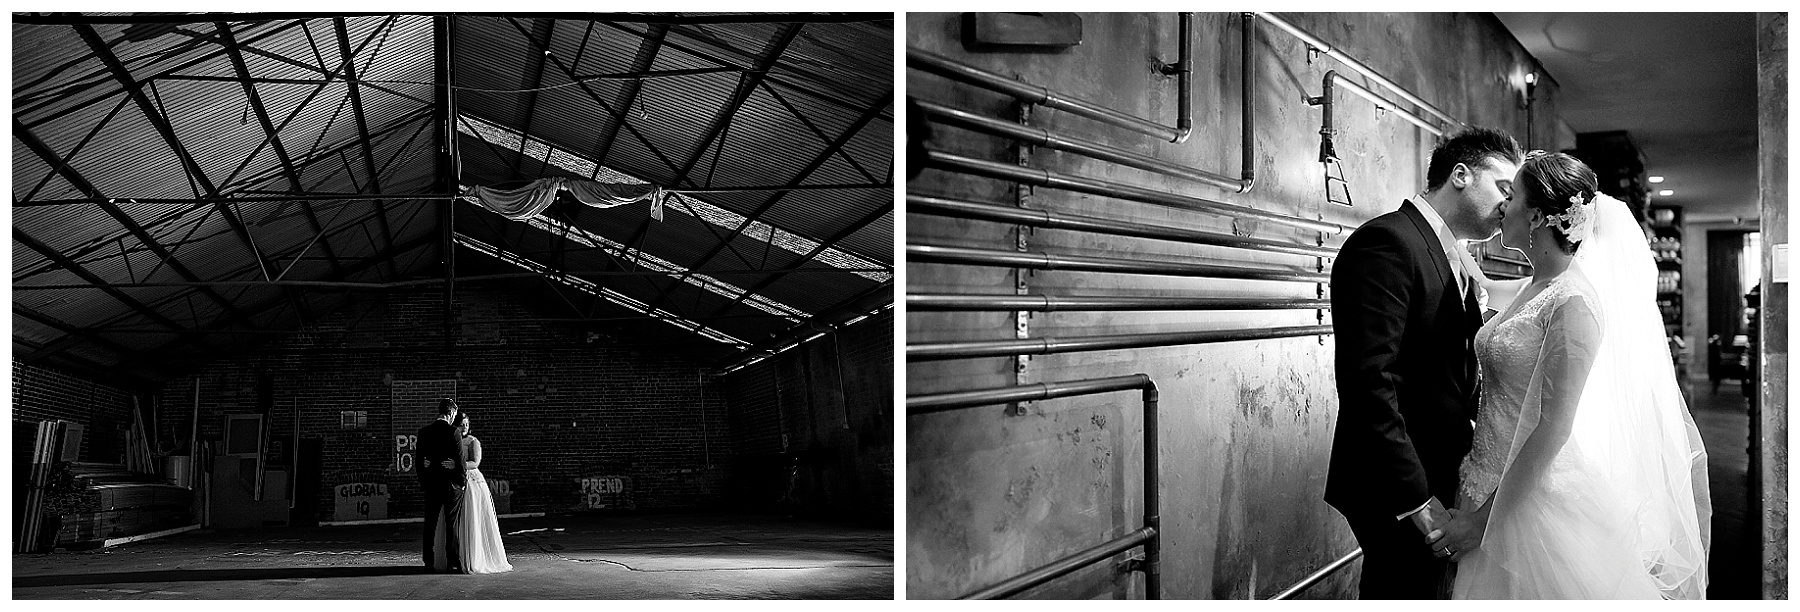 Industrial Wedding Photography Perth